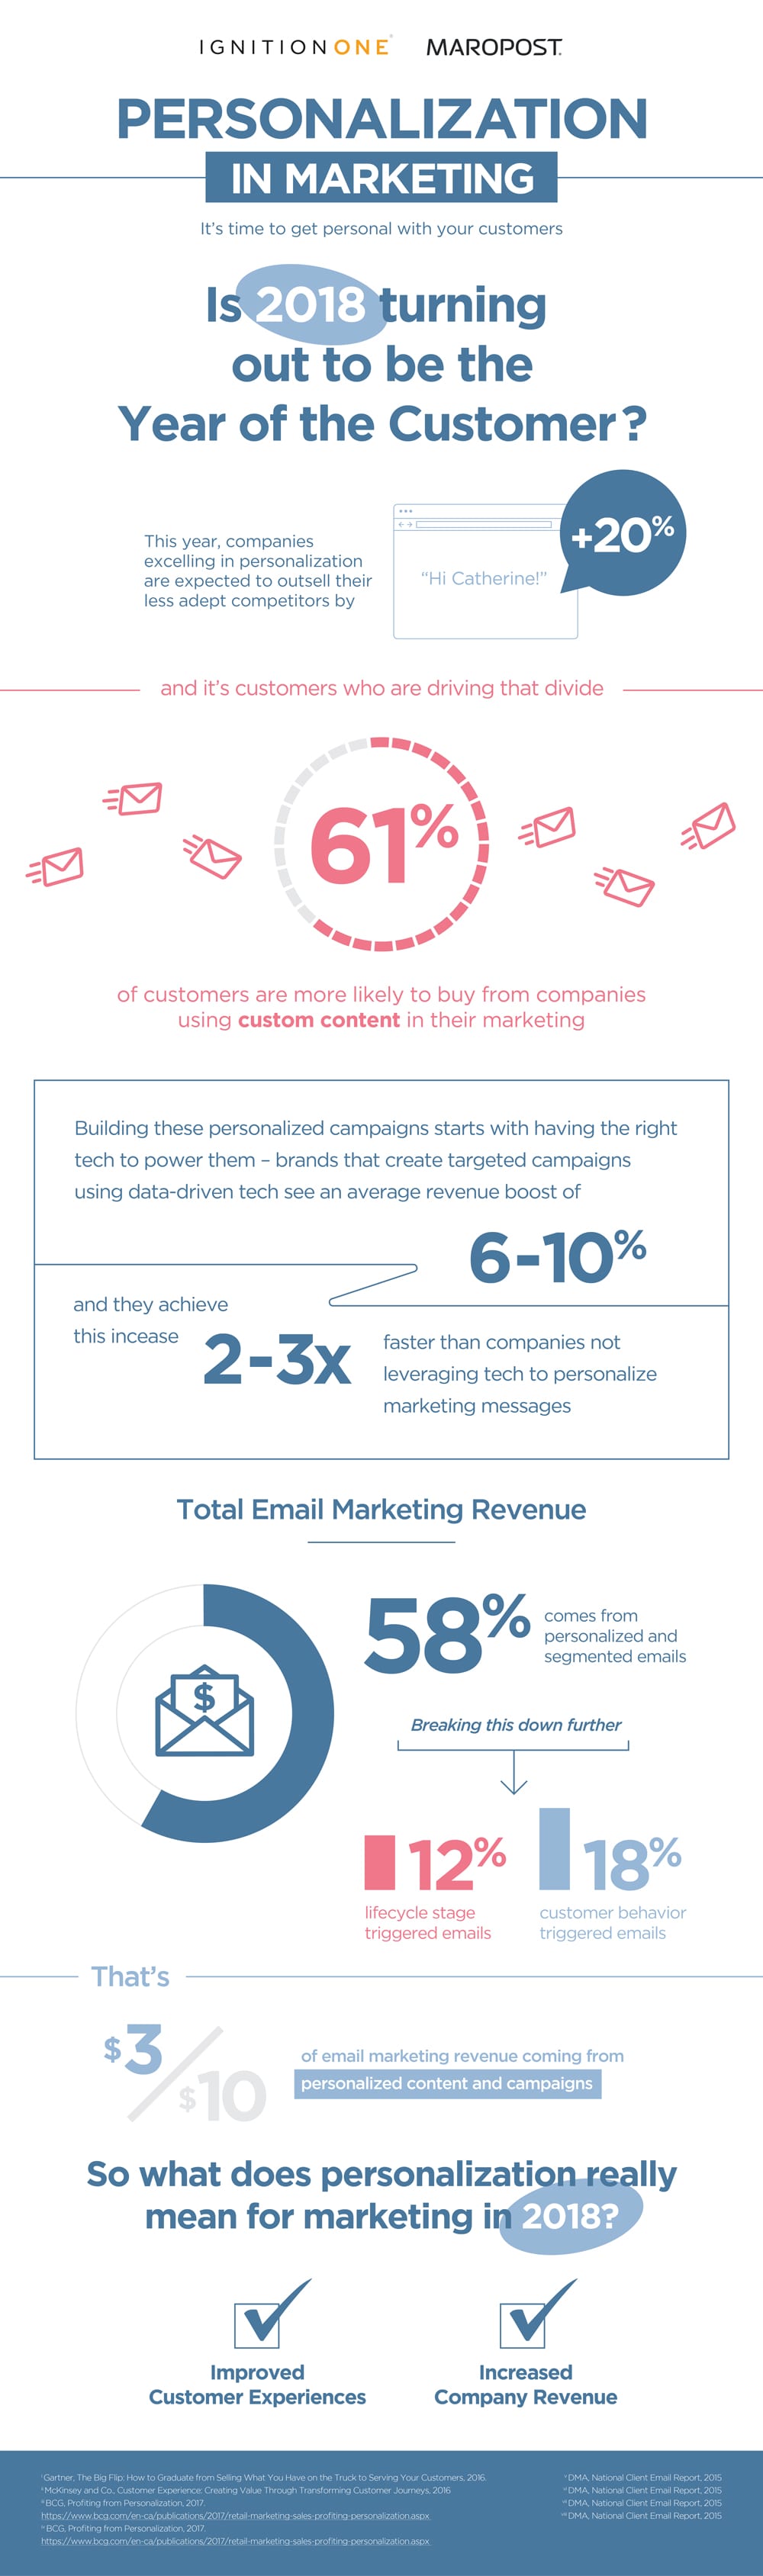 Personalization in Marketing Infographic 